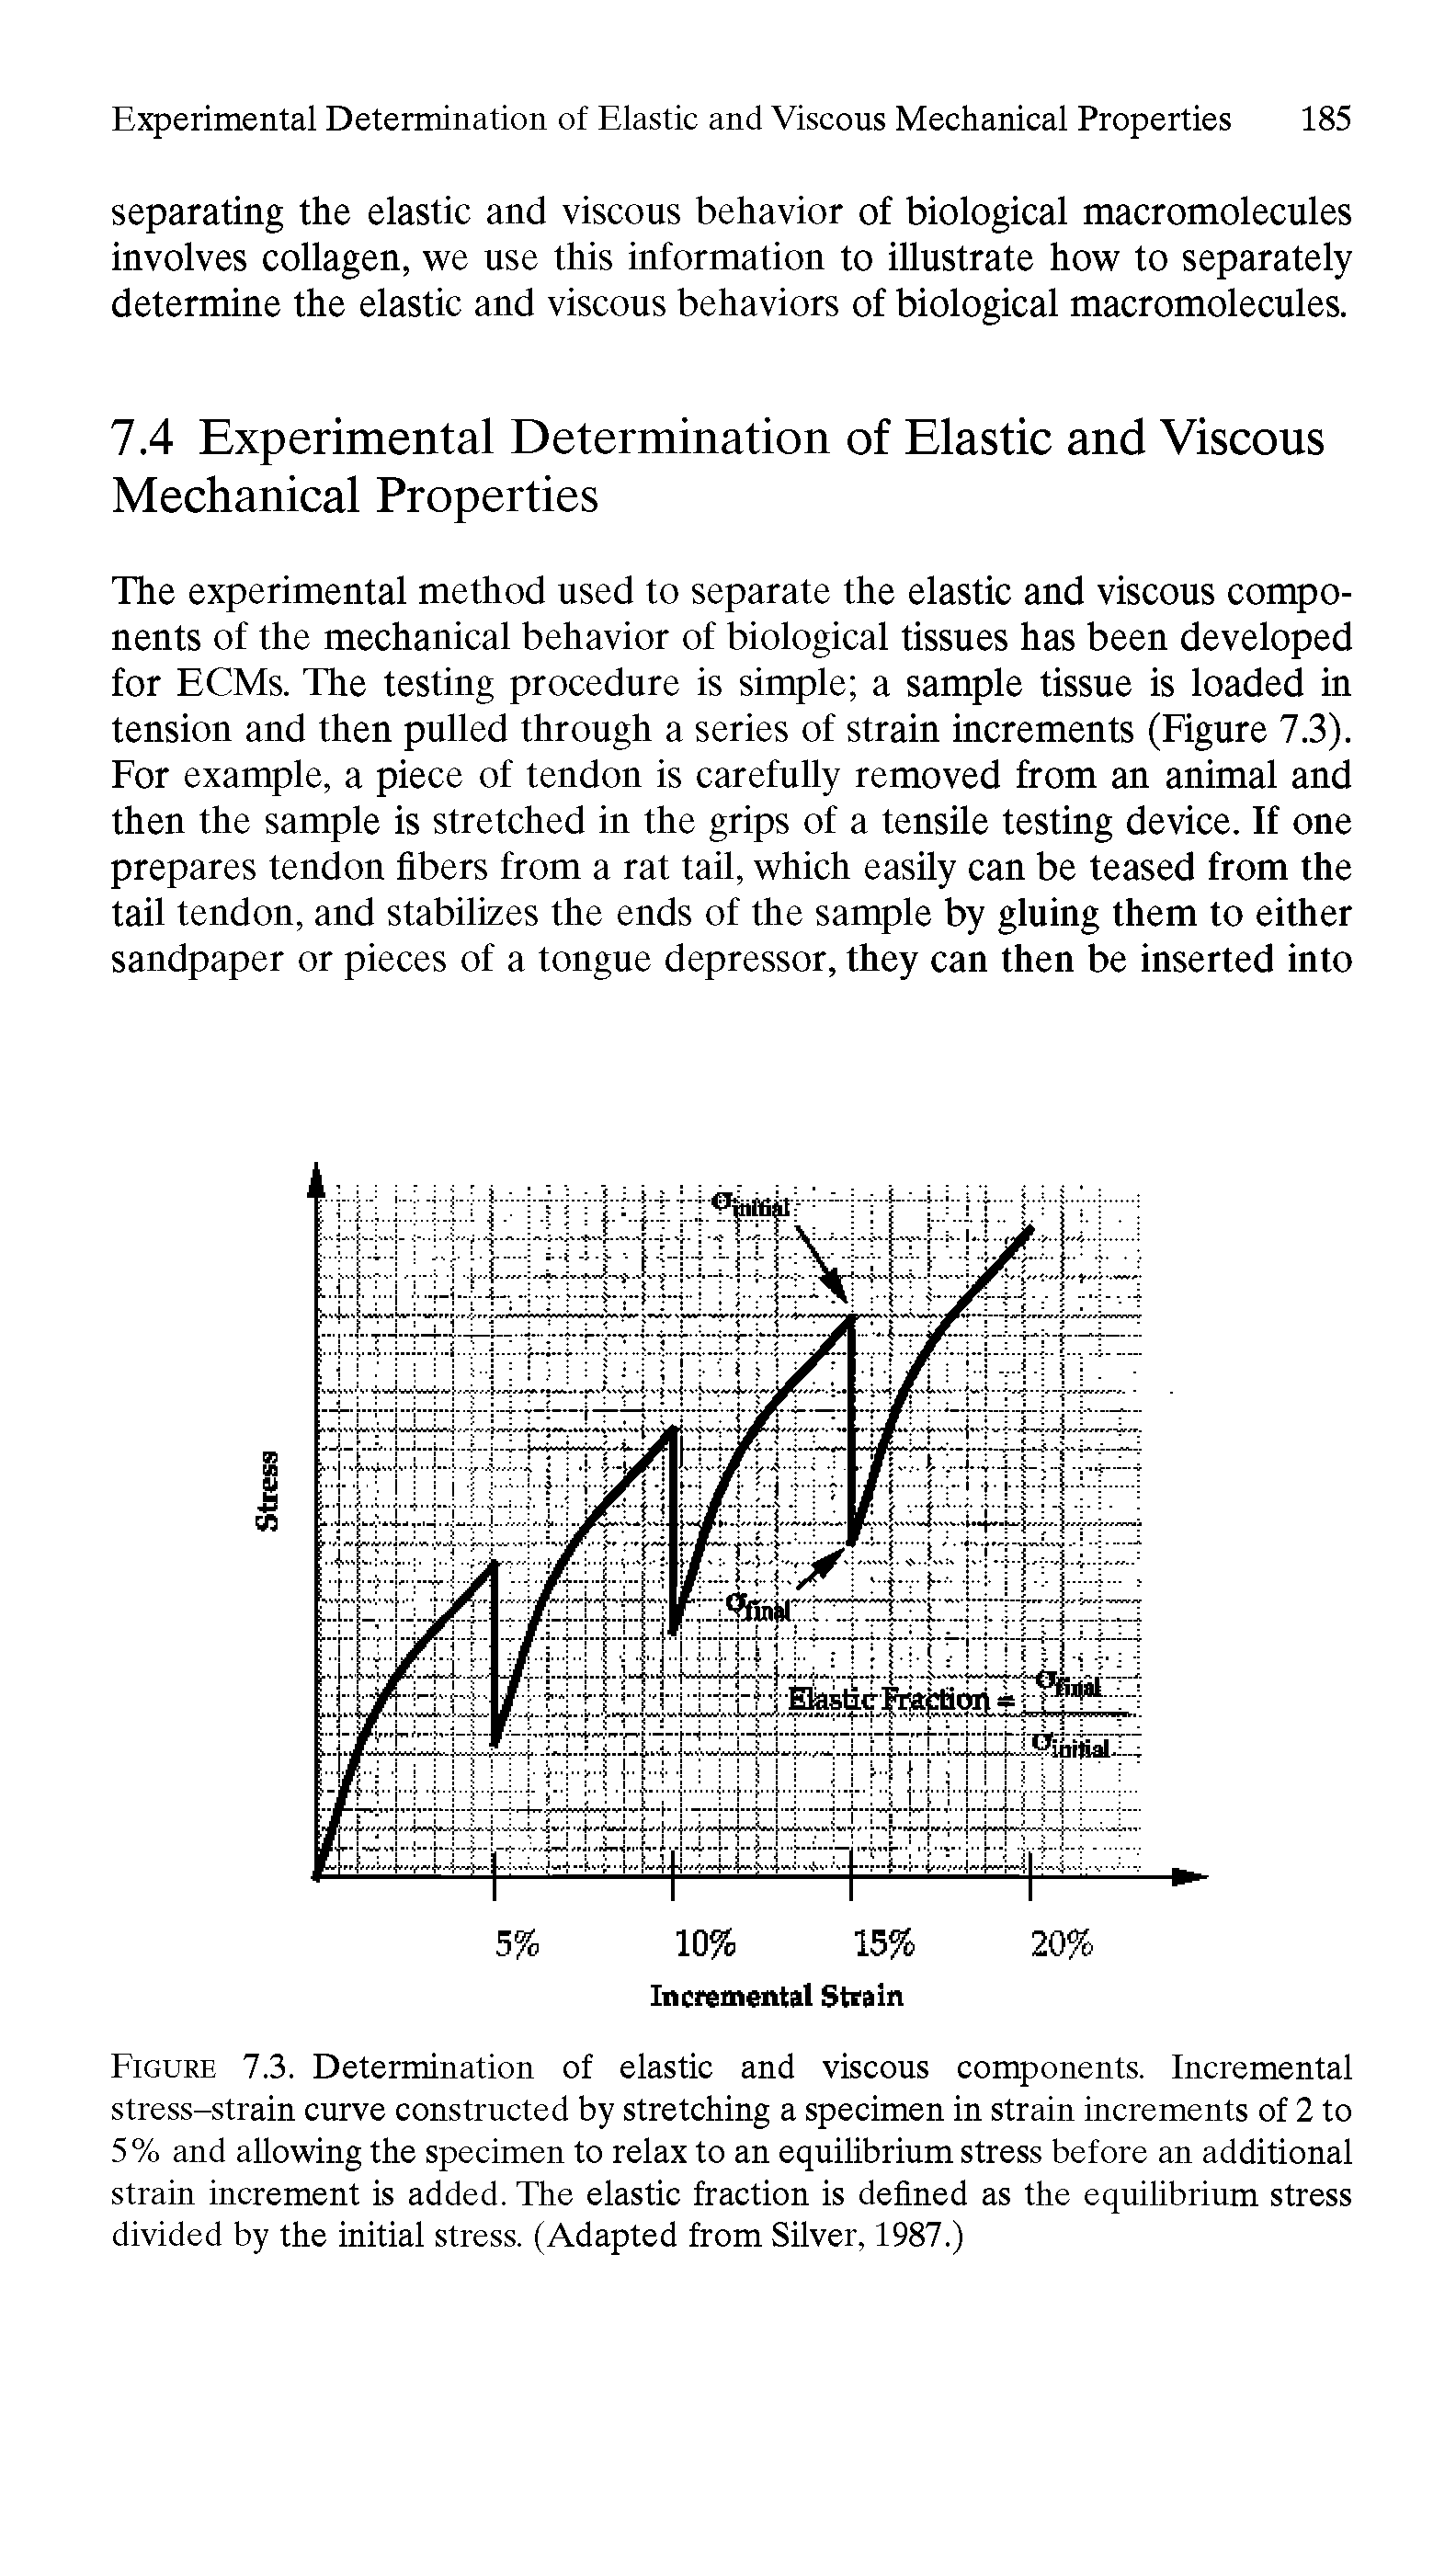 Figure 7.3. Determination of elastic and viscous components. Incremental stress-strain curve constructed by stretching a specimen in strain increments of 2 to 5% and allowing the specimen to relax to an equilibrium stress before an additional strain increment is added. The elastic fraction is defined as the equilibrium stress divided by the initial stress. (Adapted from Silver, 1987.)...